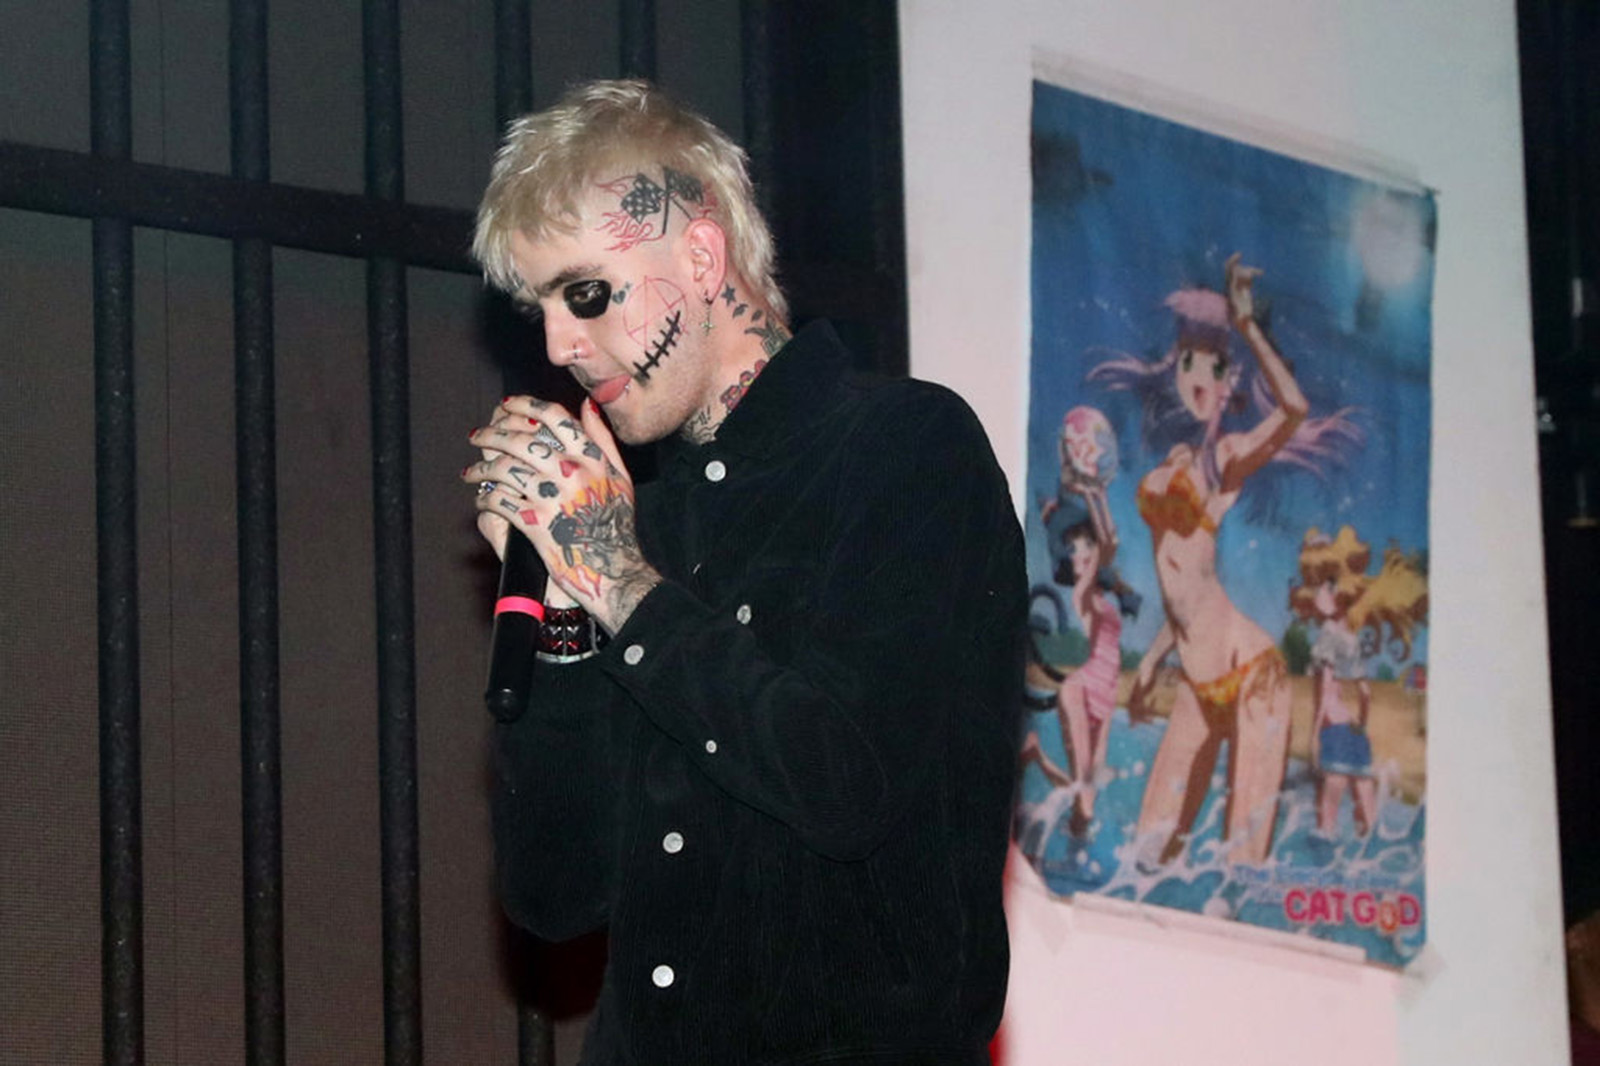 Lil Peep performs with both hands on a microphone with an anime poster behind him. He has tattoos on his hands and face, sporting a black buttoned-up coat.